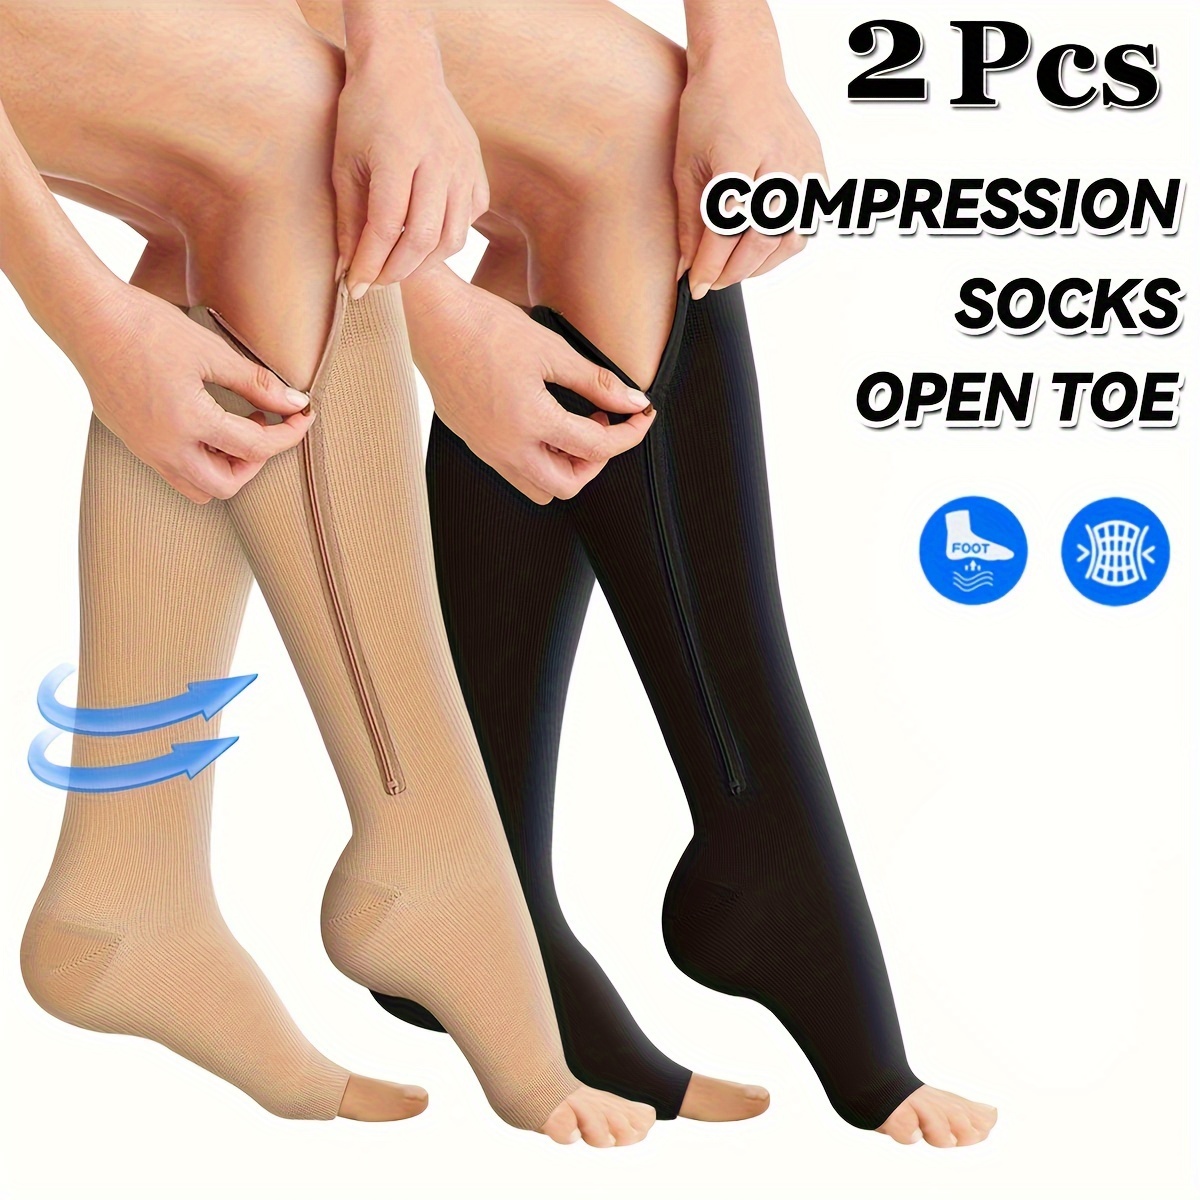 Zipper Compression Socks, 2 Pairs Open Toe Compression Stockings for Men  Women 